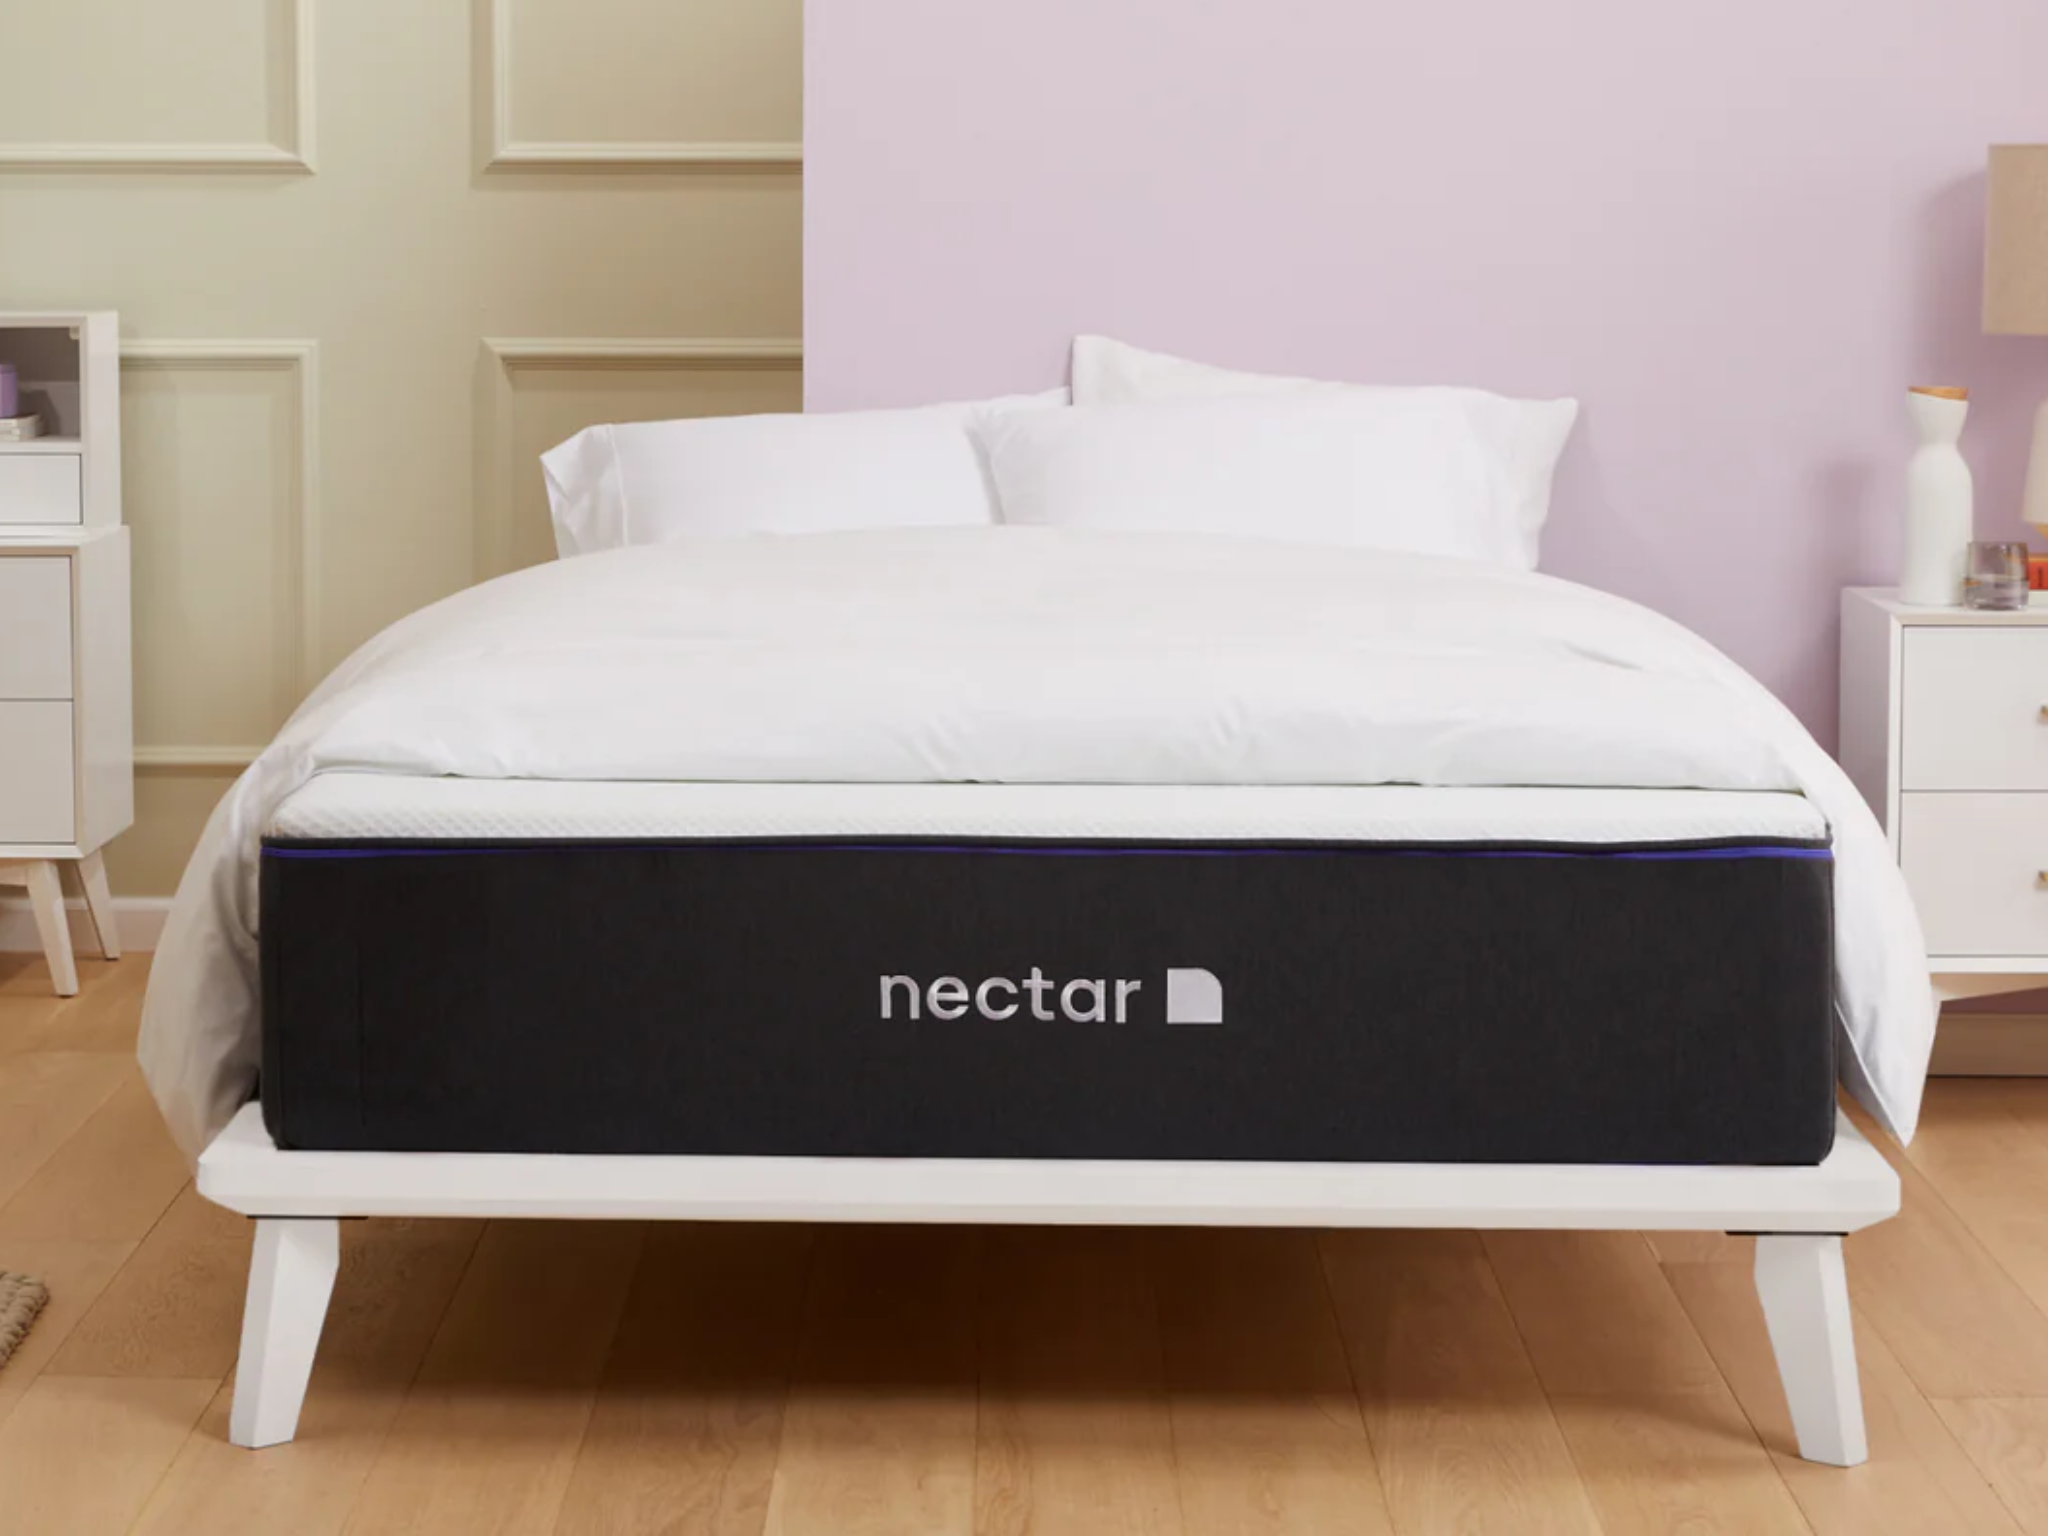 nectar-mattress-review-indybest (1).png